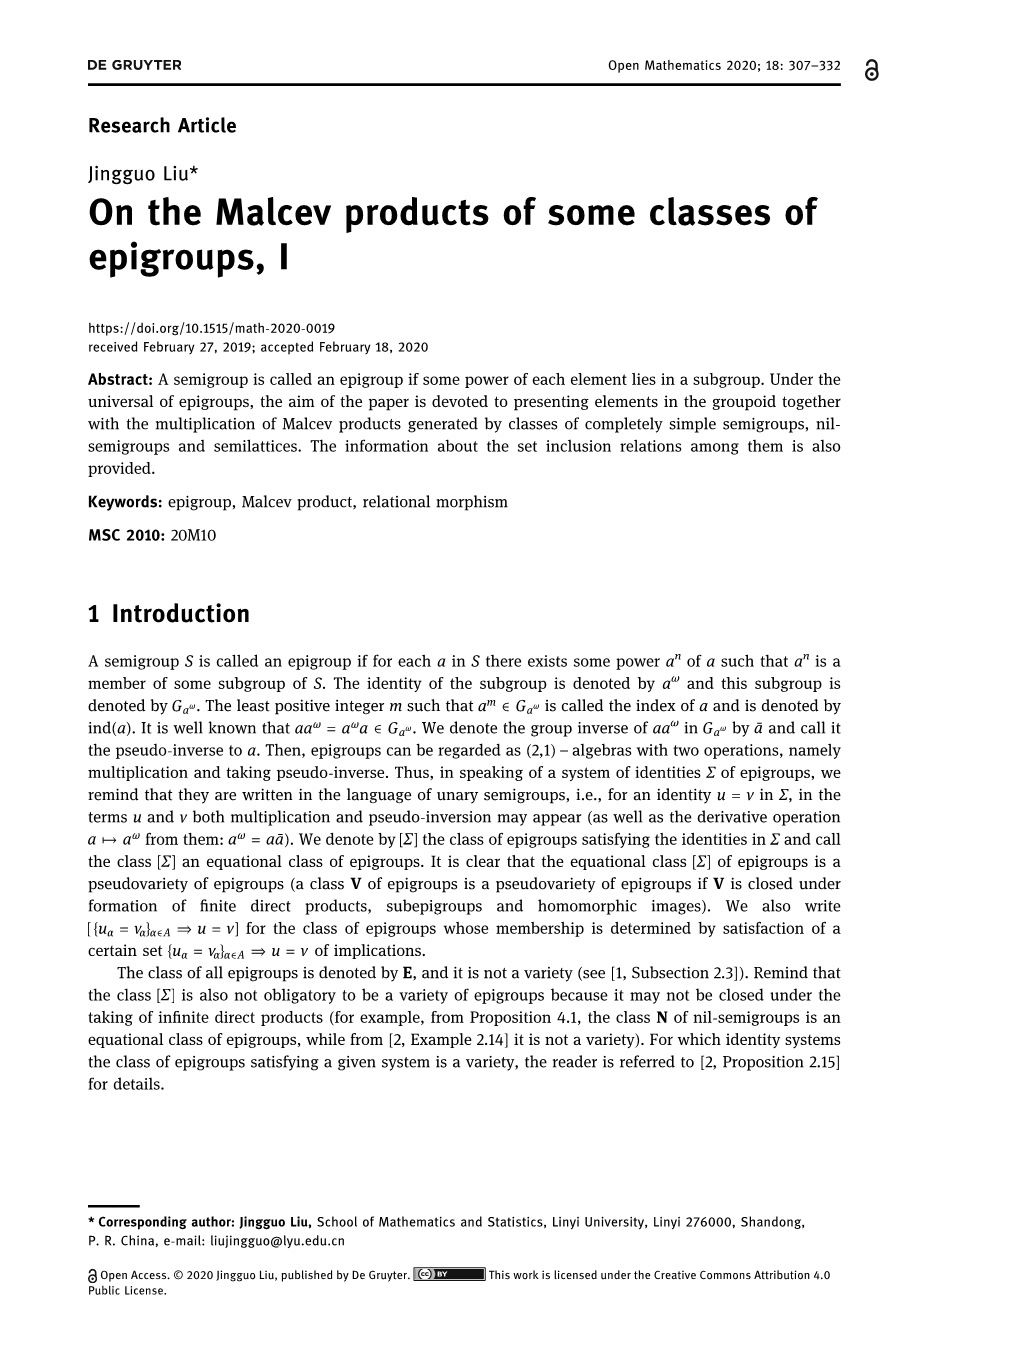 On the Malcev Products of Some Classes of Epigroups, I